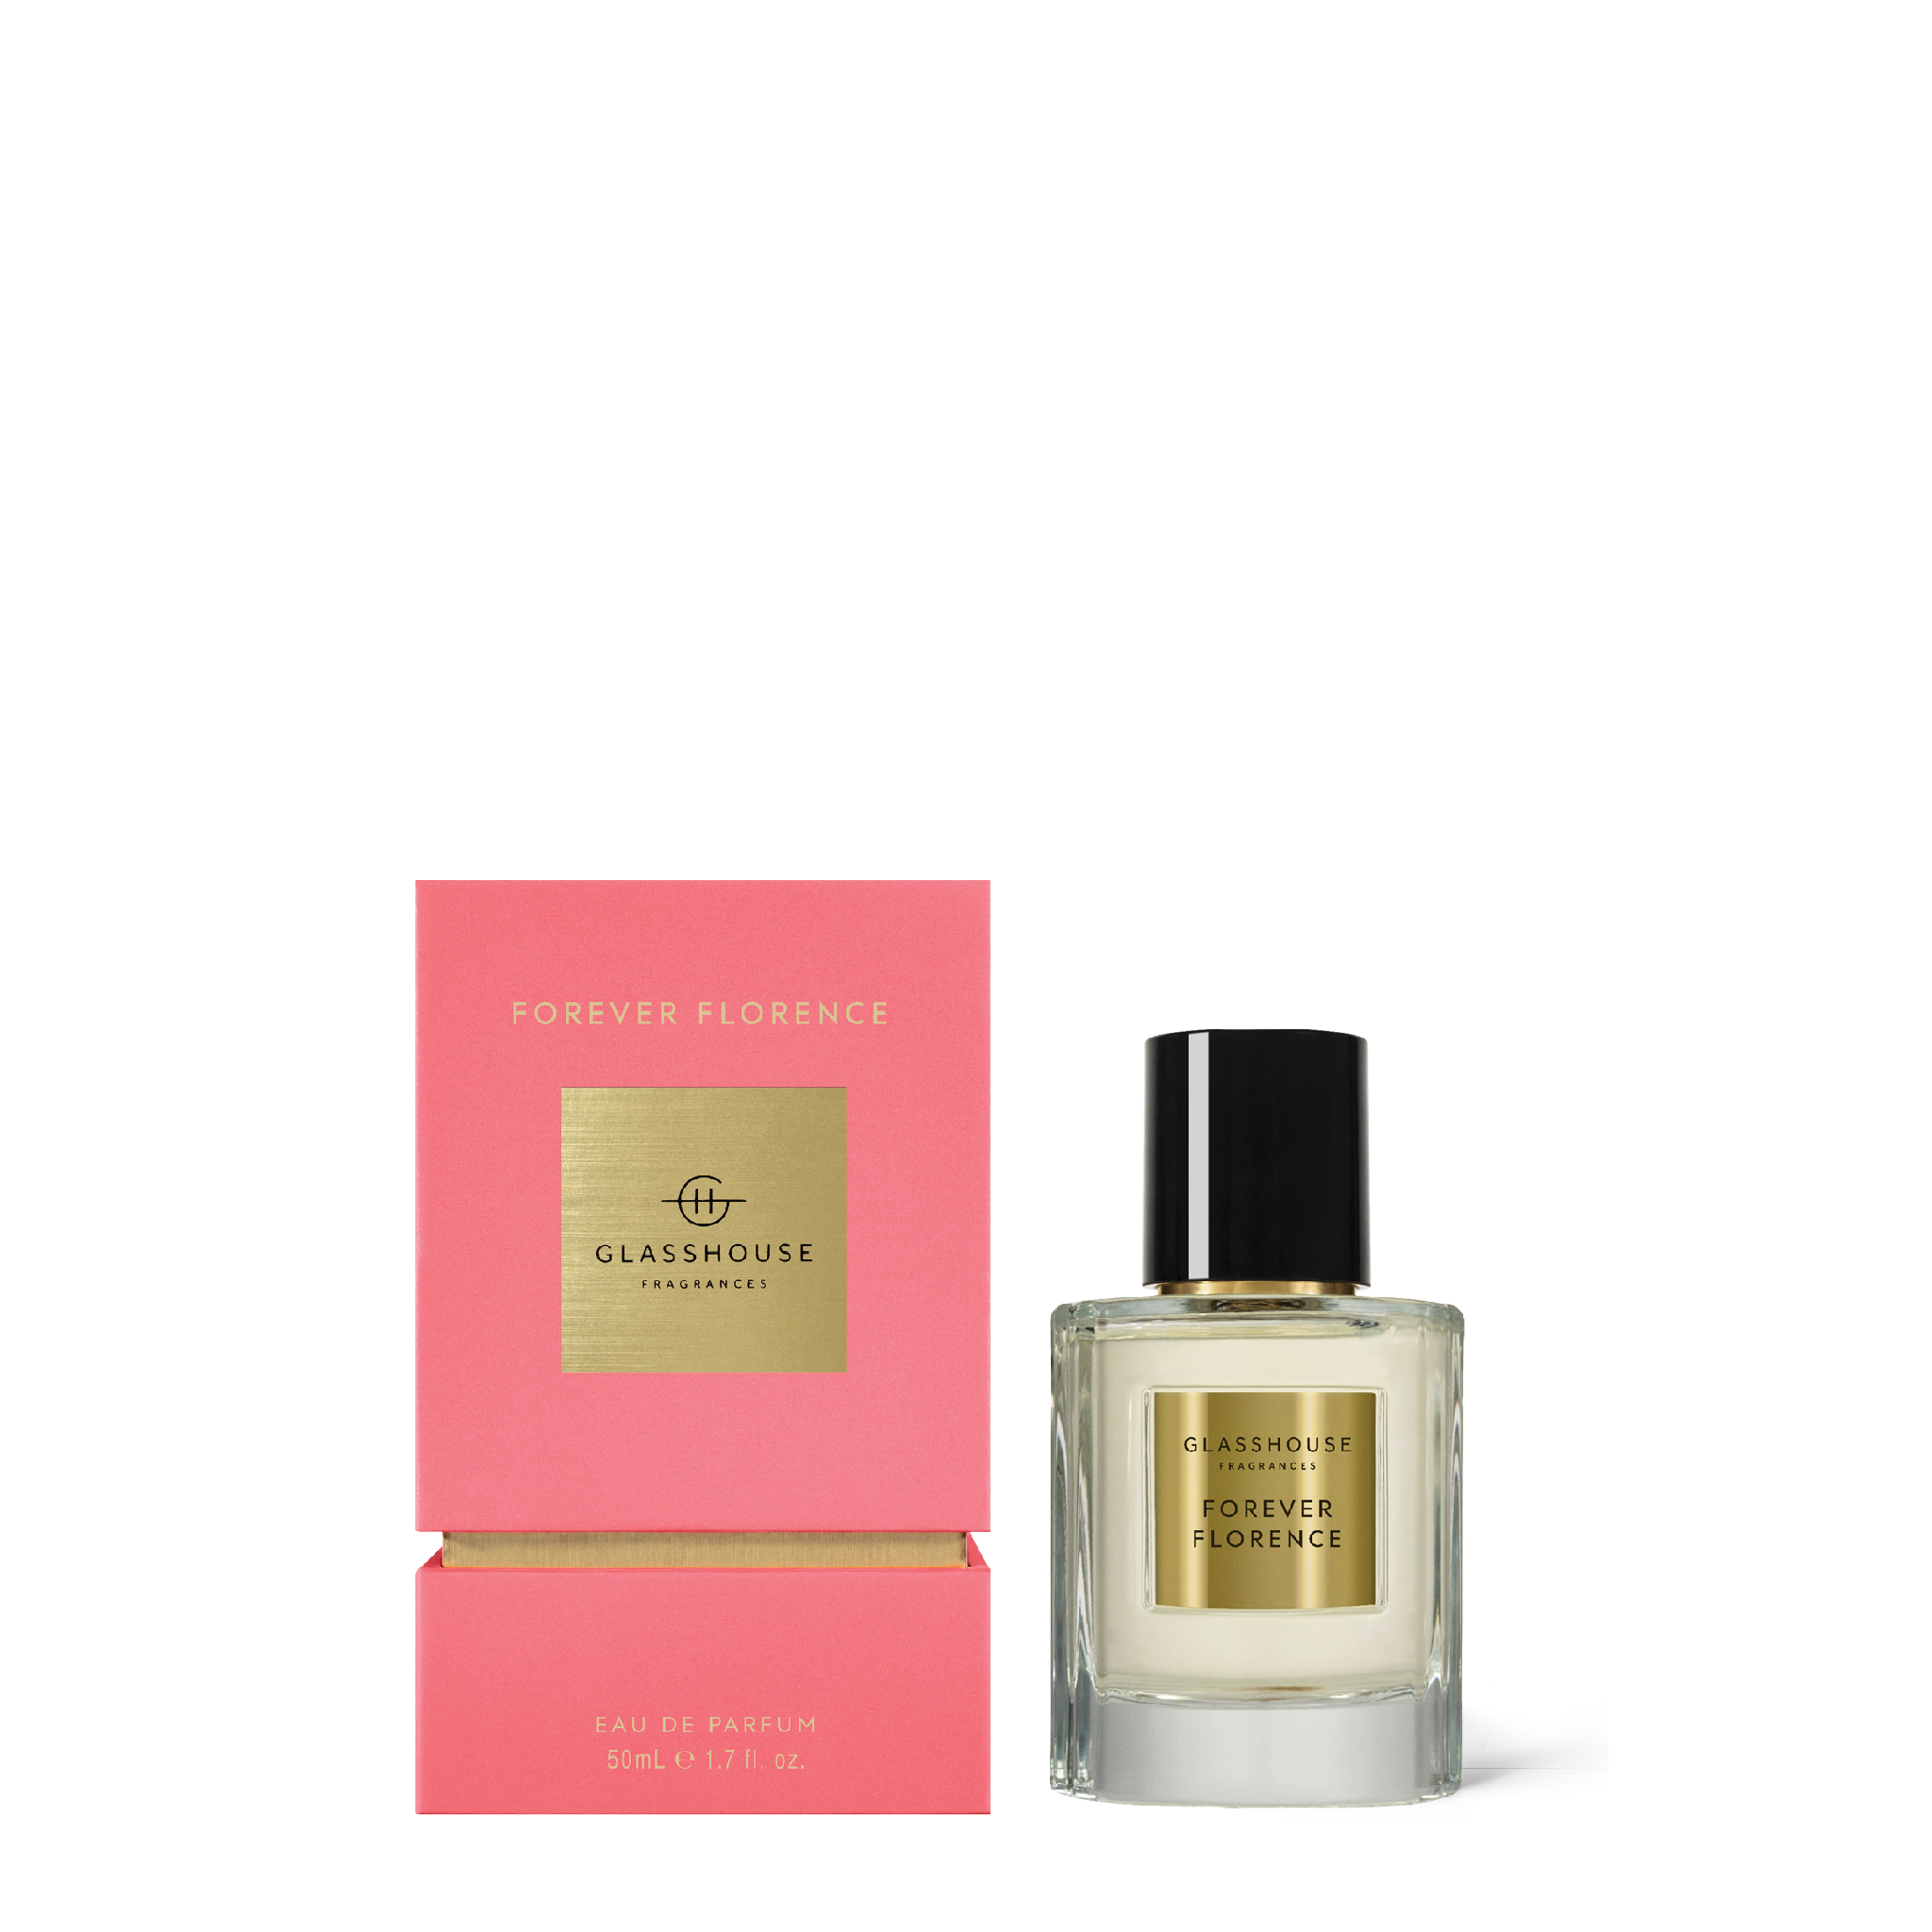 Glasshouse Fragrances Forever Florence Wild Peonies and Lily 50mL Eau de Parfum Spray with box